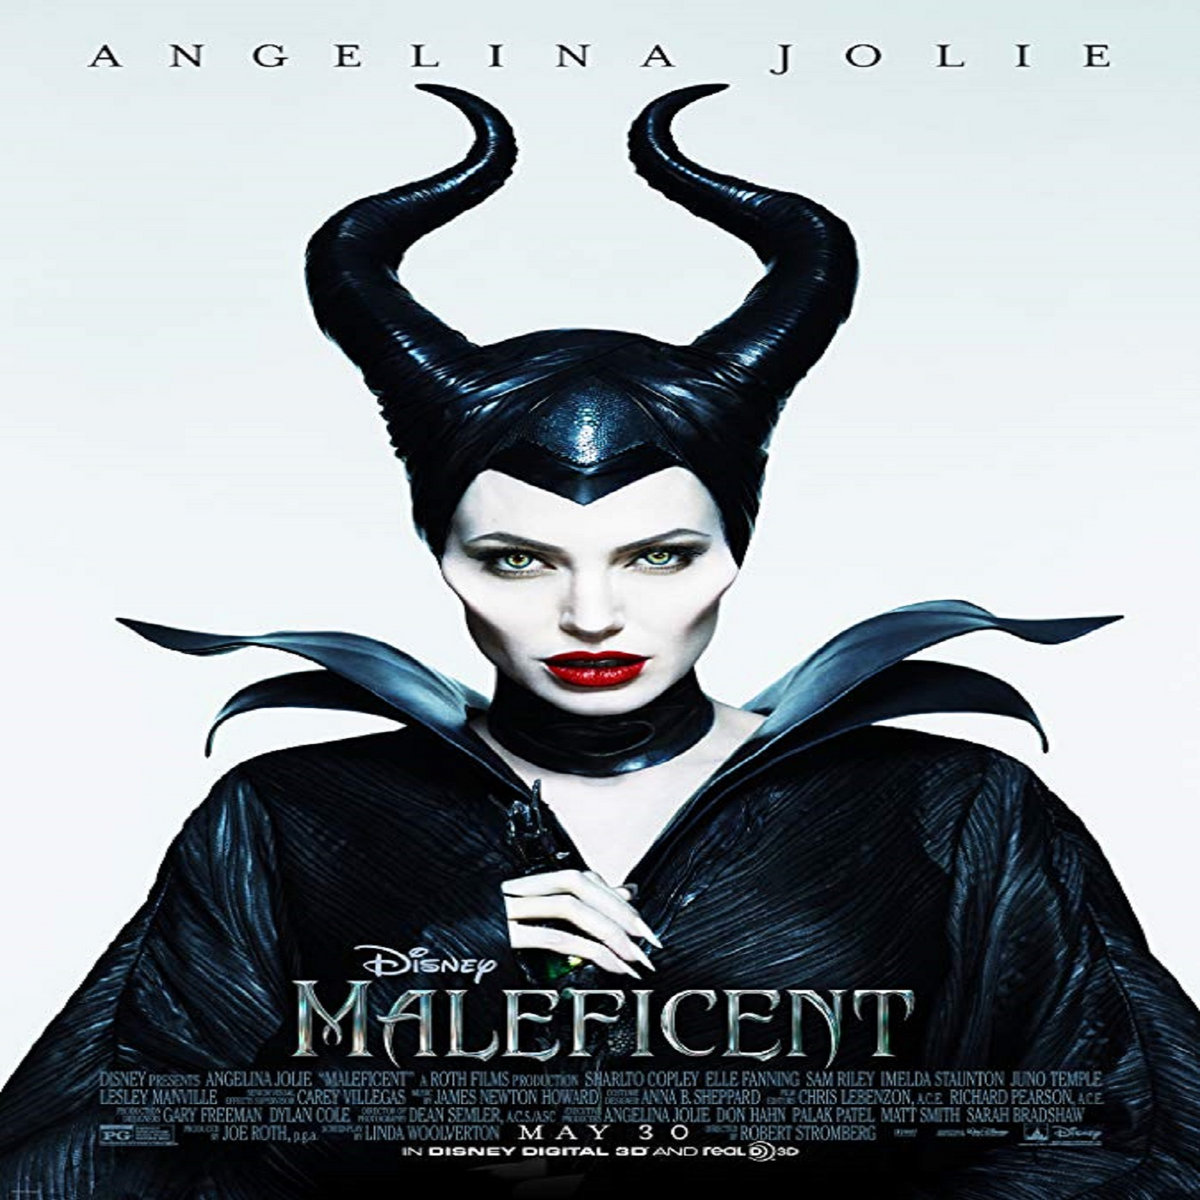 Maleficent 2014 Full Movie Online In Hd Quality